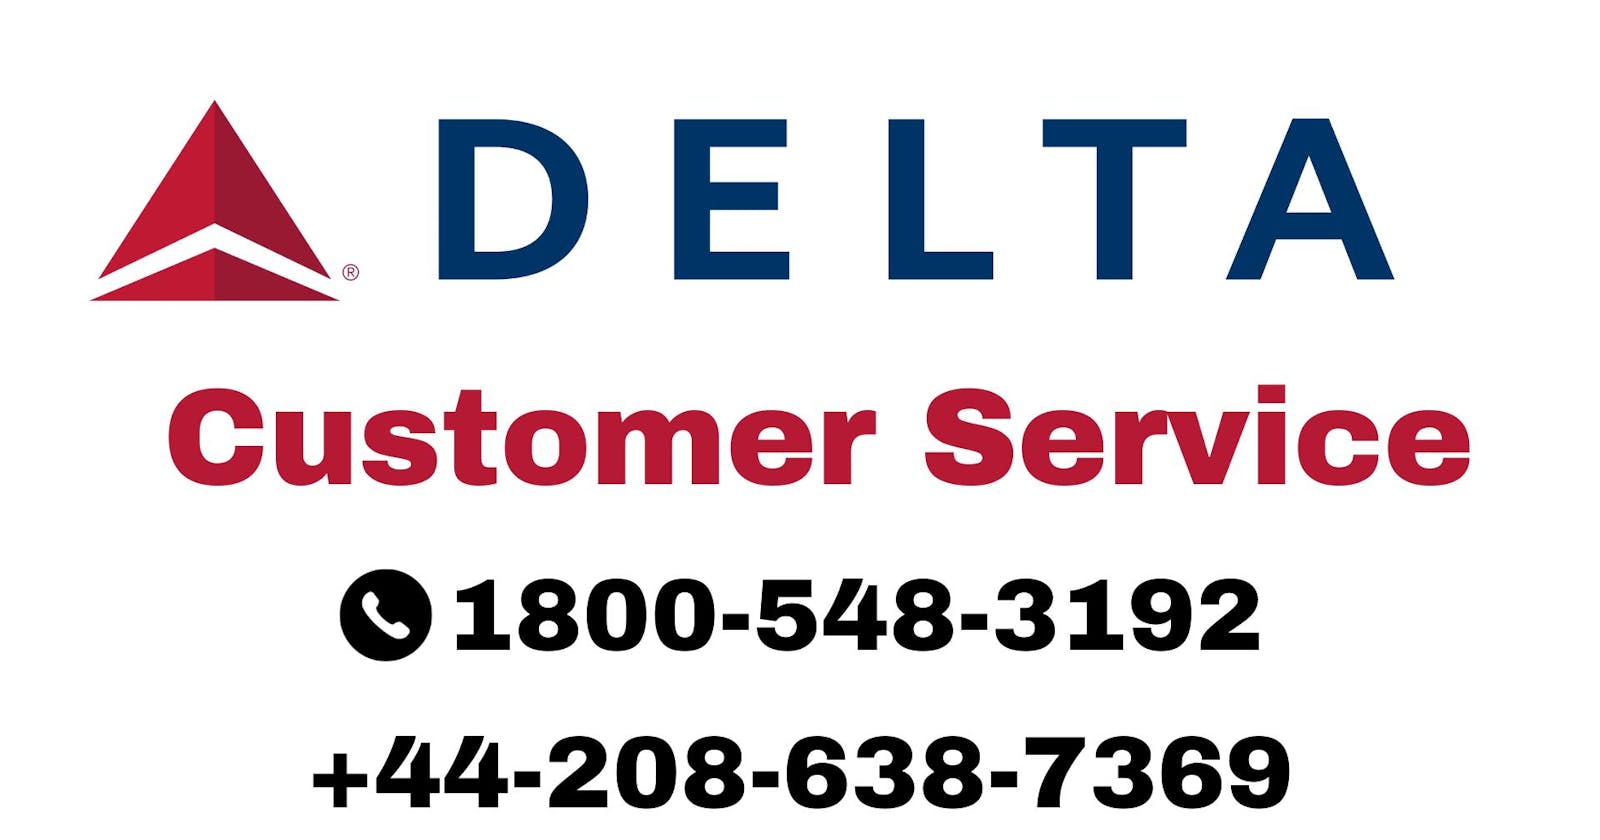 What is Delta Airlines Customer Support Phone Number?